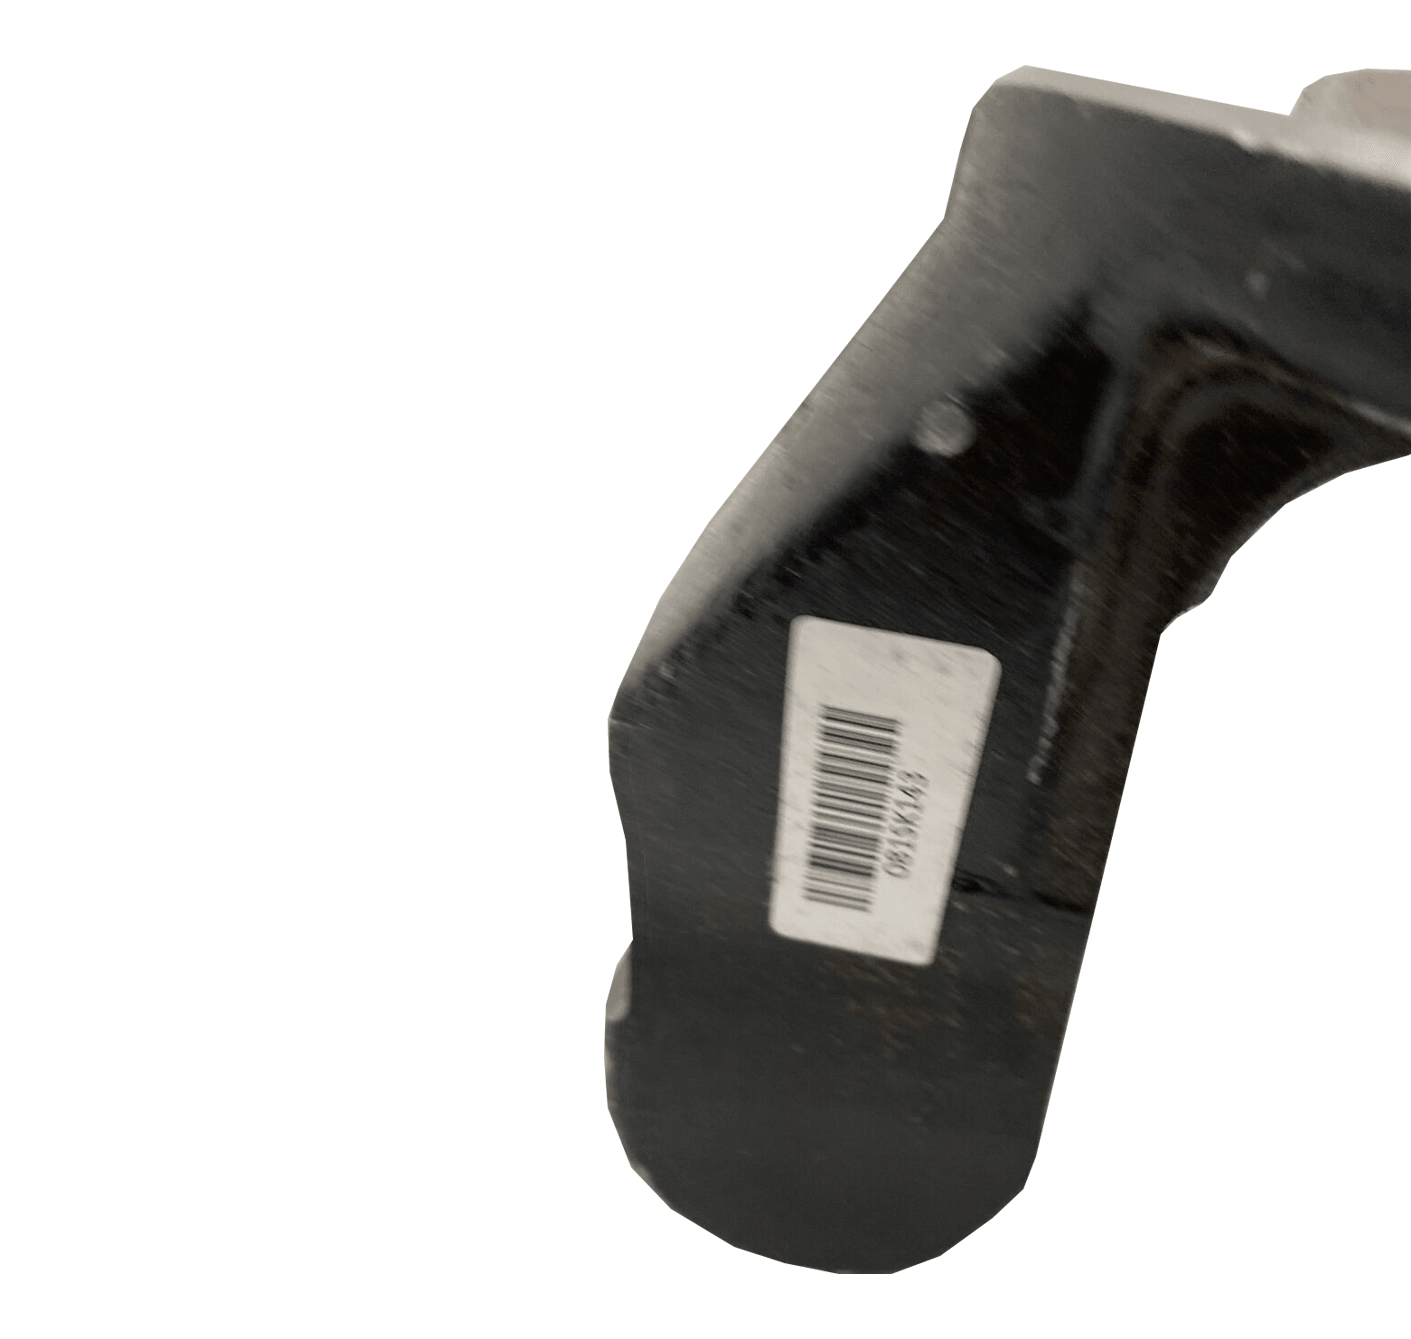 081Sk143 Genuine Dana Holding Corporation® Right Knuckle D850F - ADVANCED TRUCK PARTS